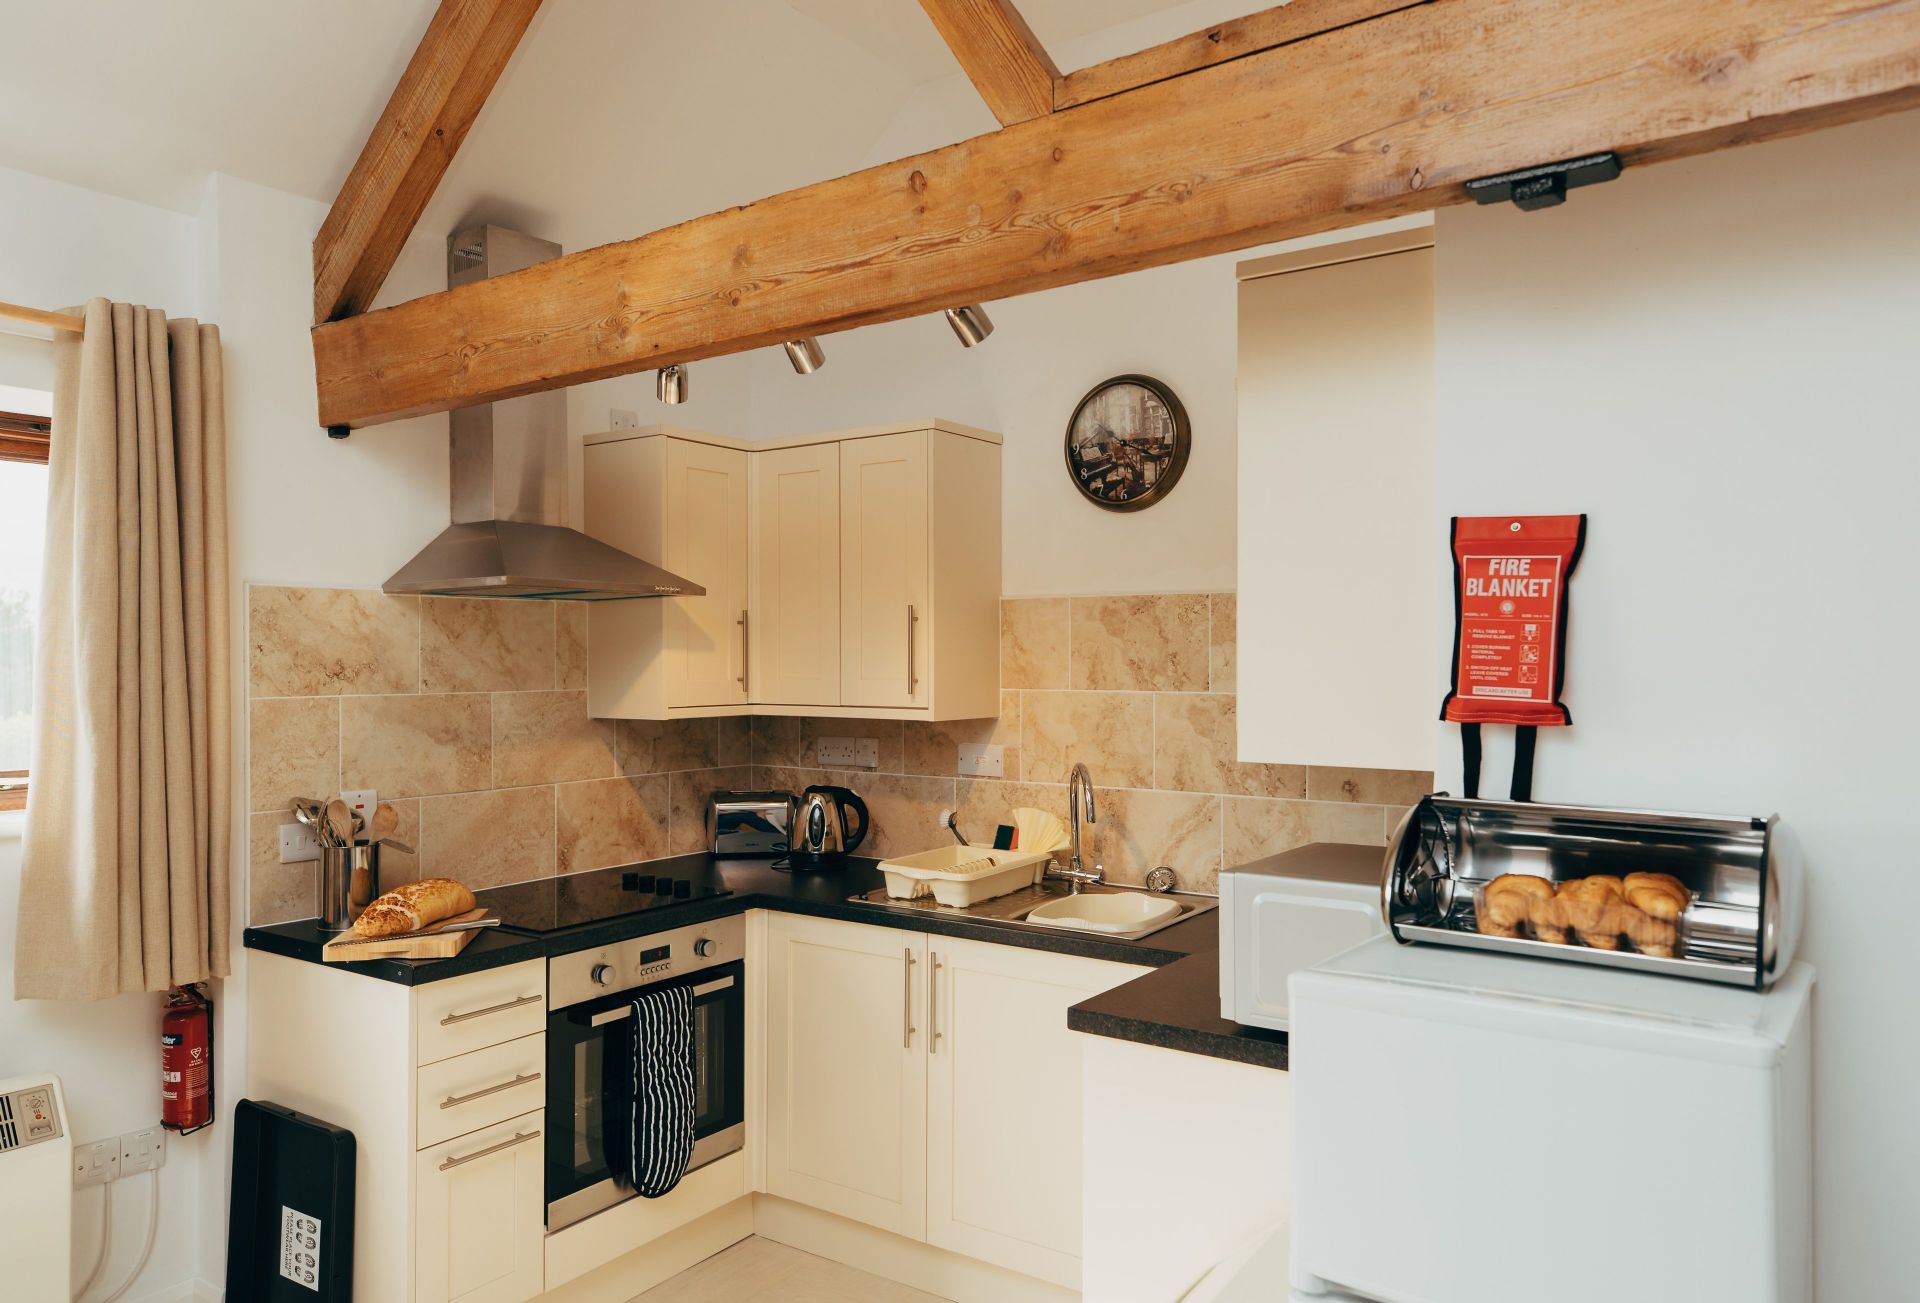 Turnip Cottage is located in Dorchester and surrounding villages